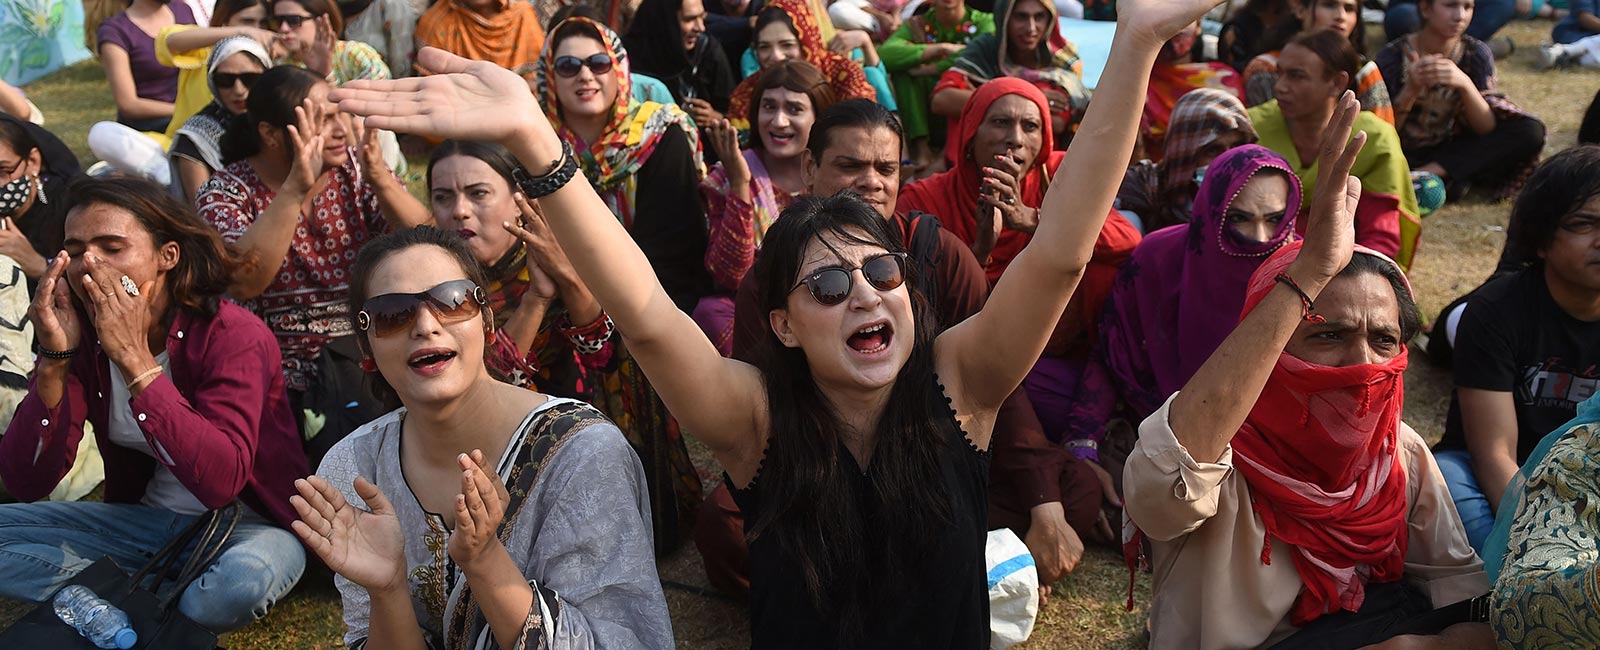 Pakistan's transgender activists seek rights and protection 